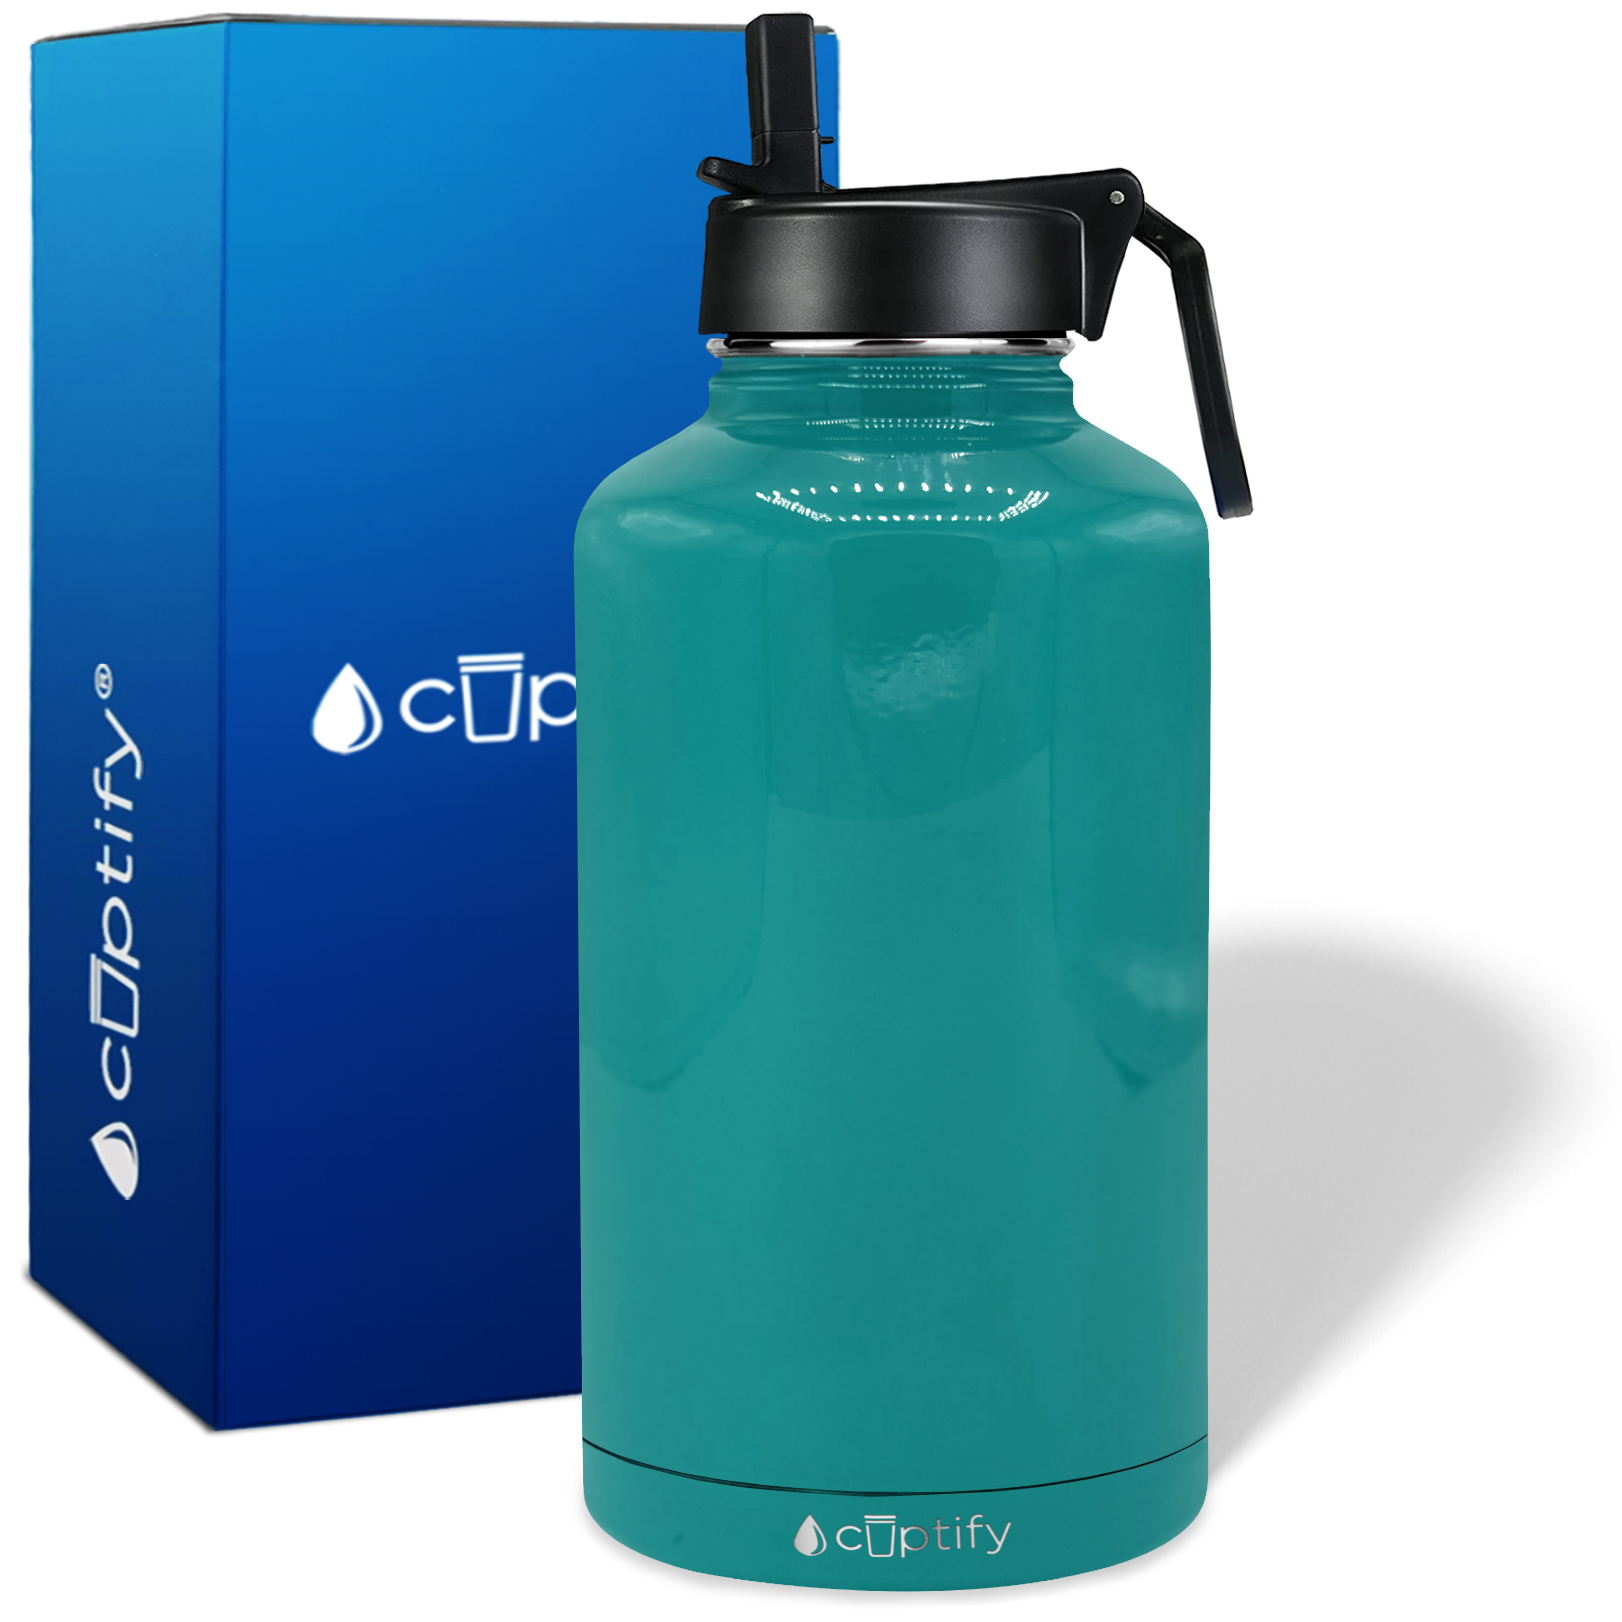 Simple Modern 32oz Insulated Summit Water Bottle Straw Lid - Sea Color 